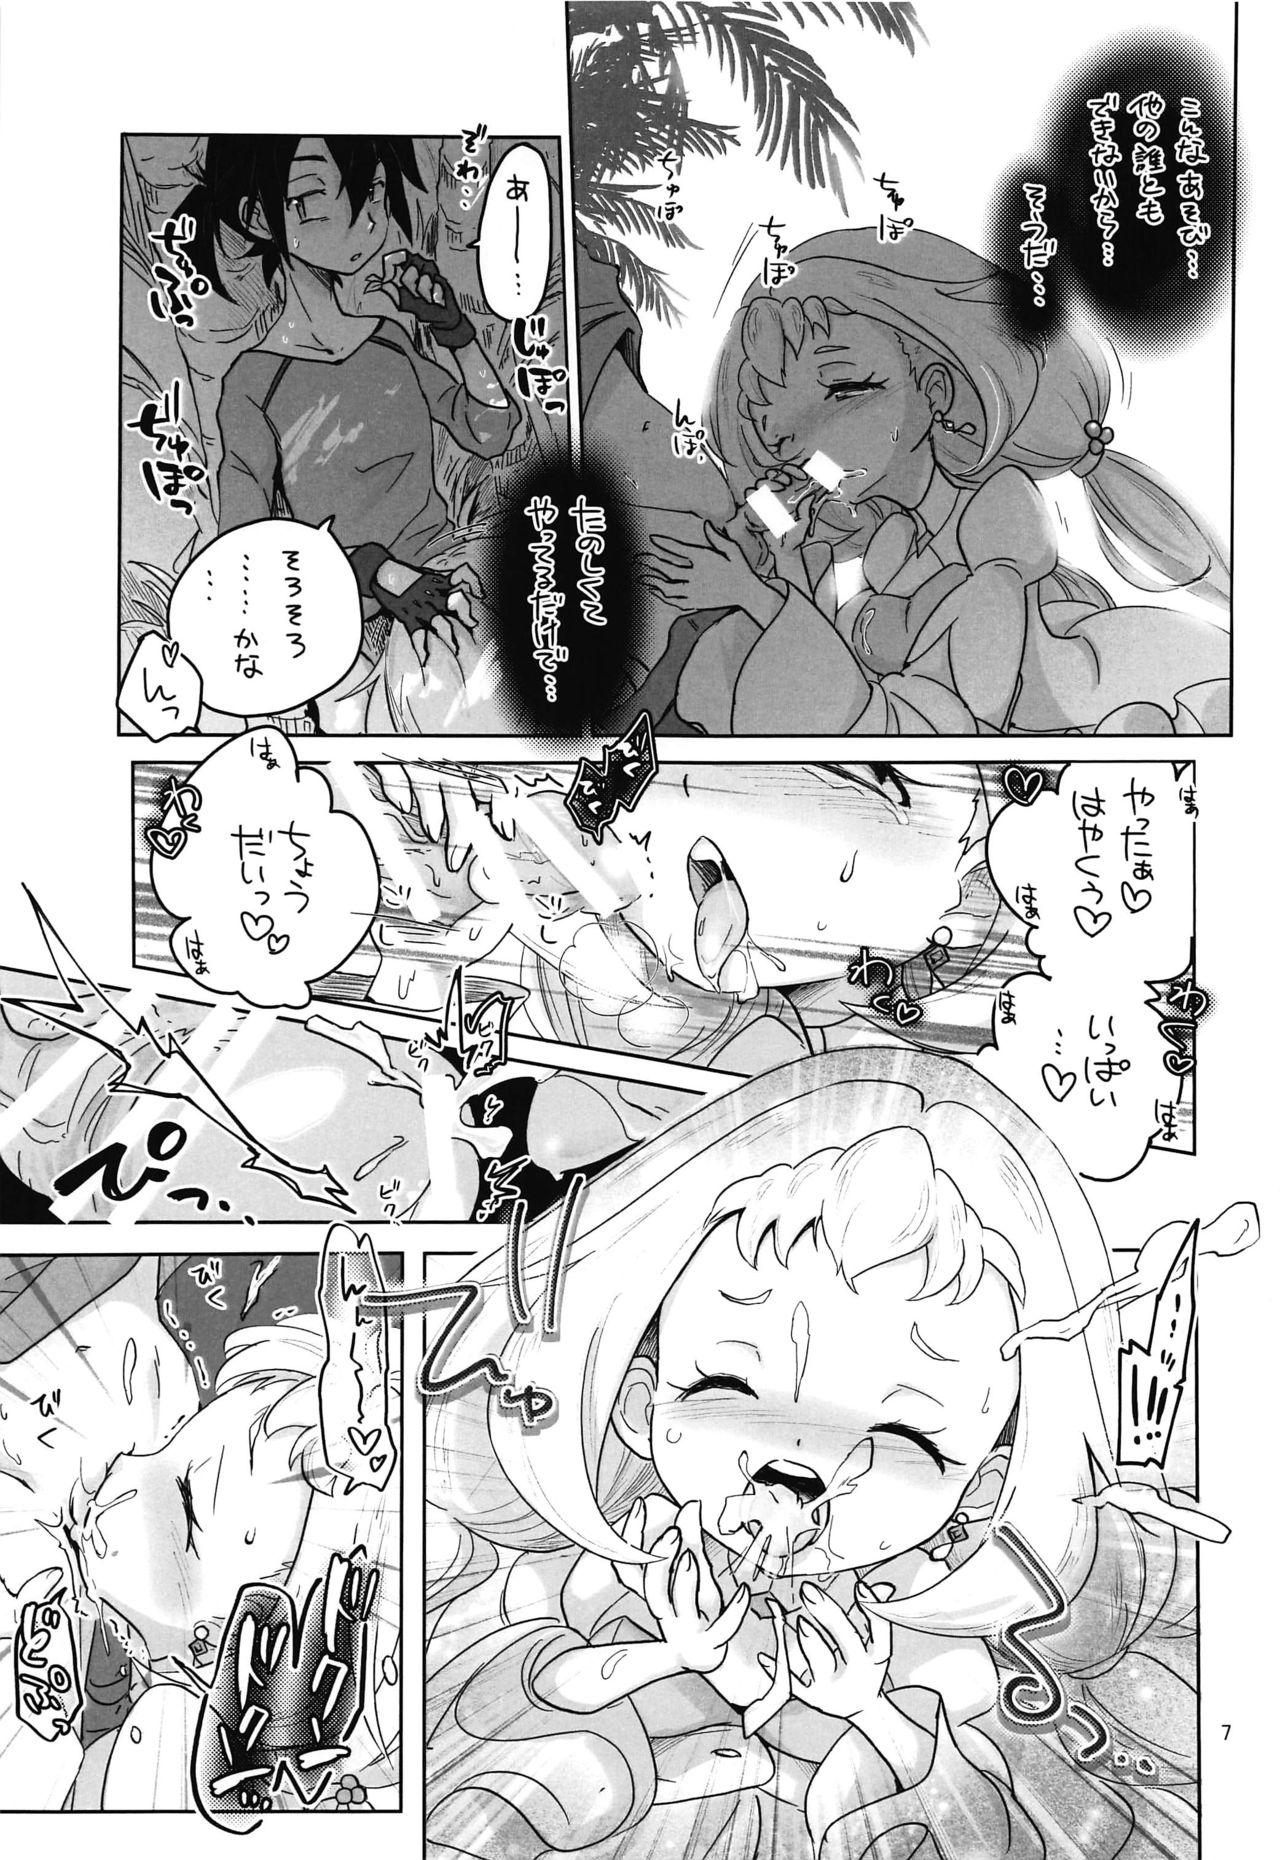 Cums Comin' Thro' the DAYDREAM - Gundam build divers Colombiana - Page 6